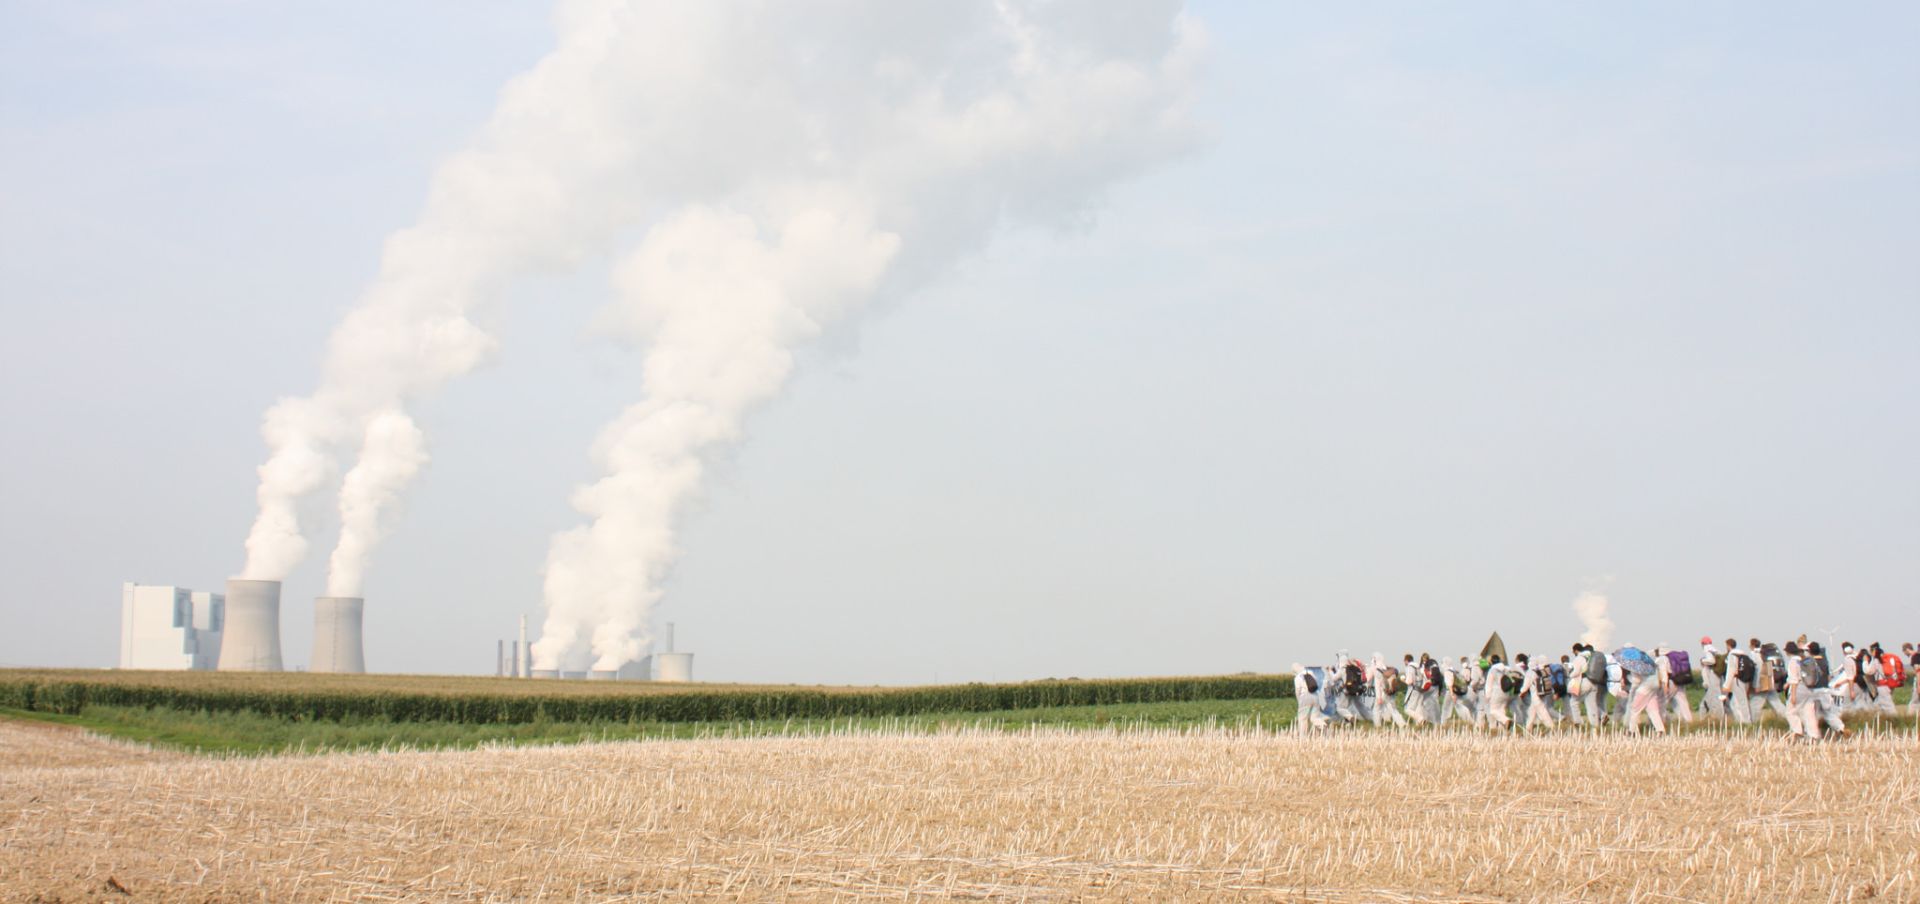 group of activists in white jumpsuits walking through a field towards coal towers